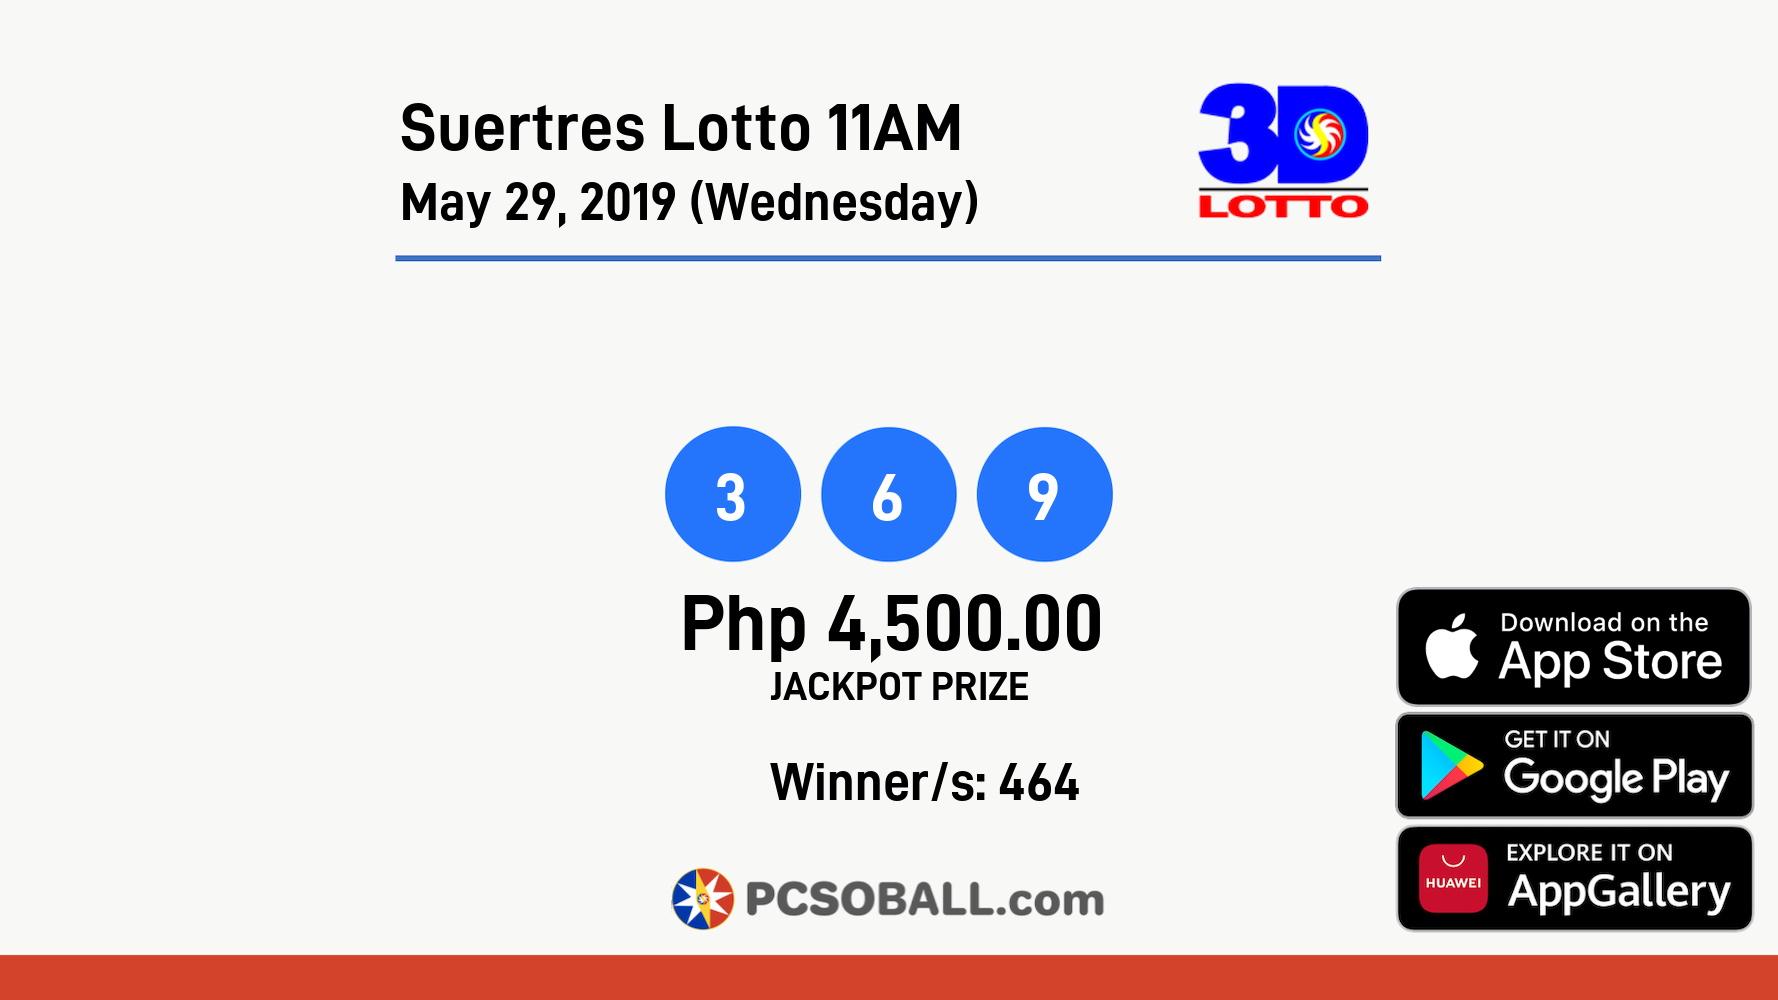 Suertres Lotto 11AM May 29, 2019 (Wednesday) Result